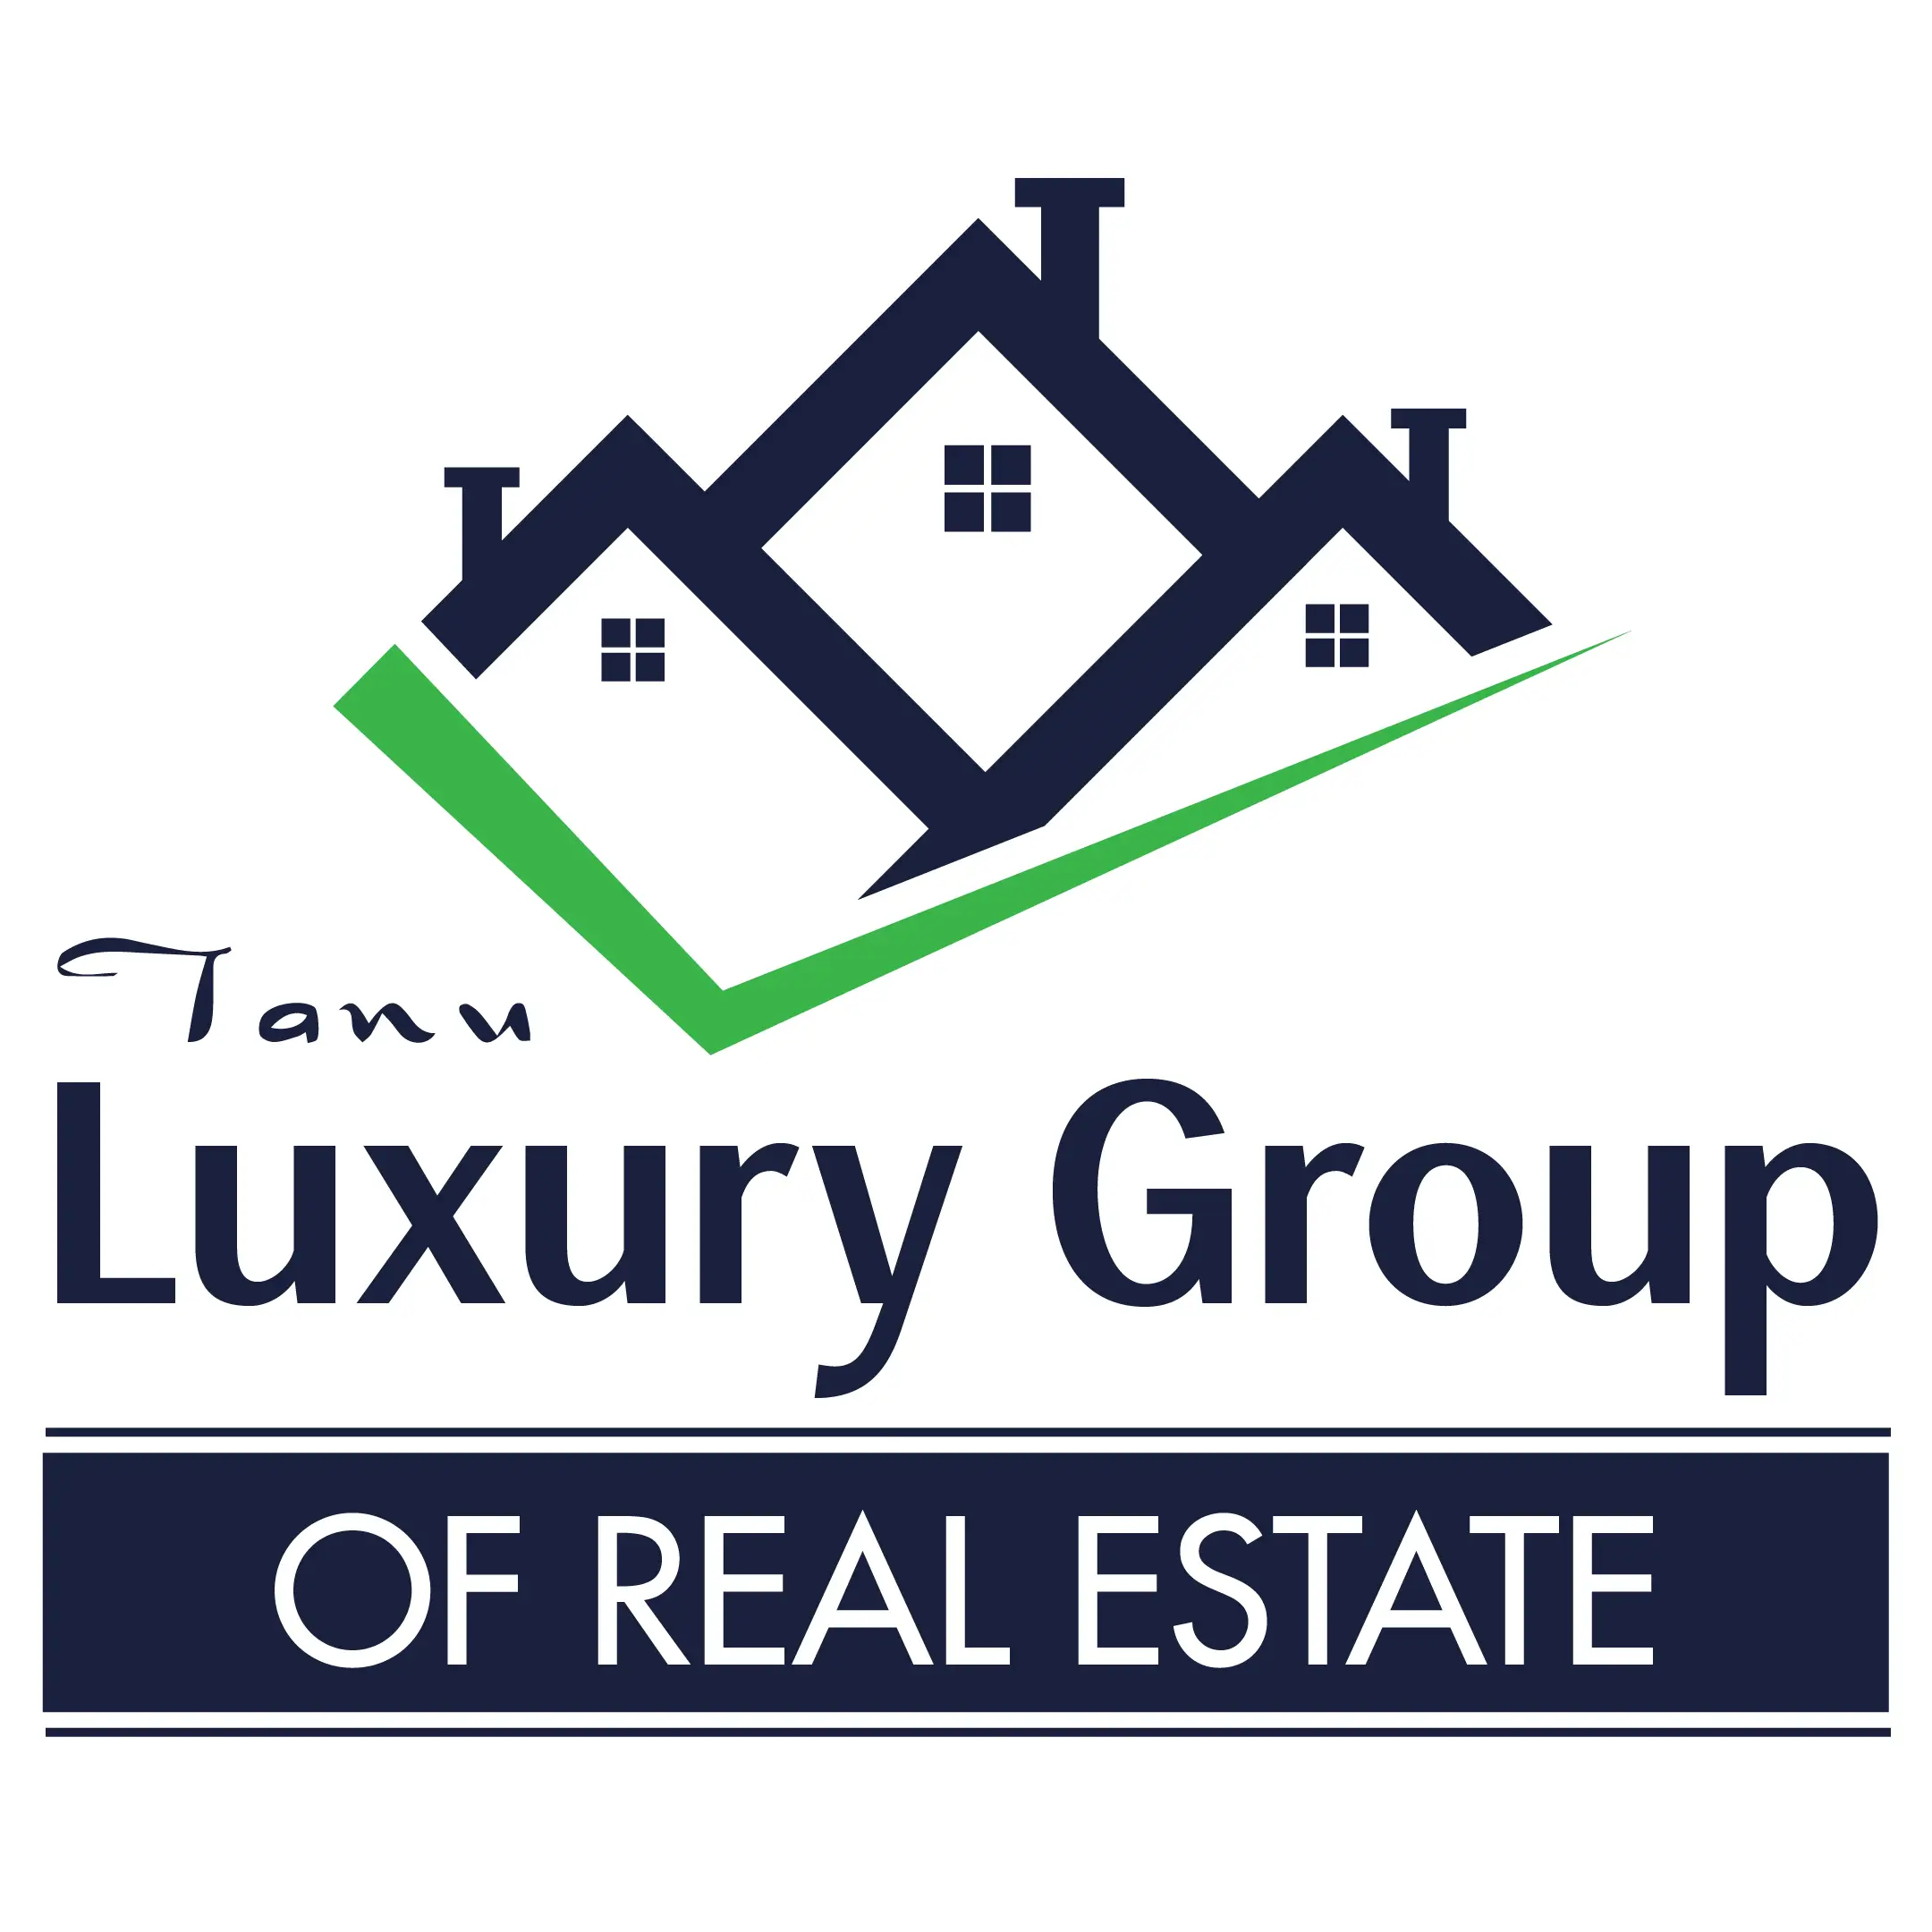 Luxury Group of Real Estate Logo